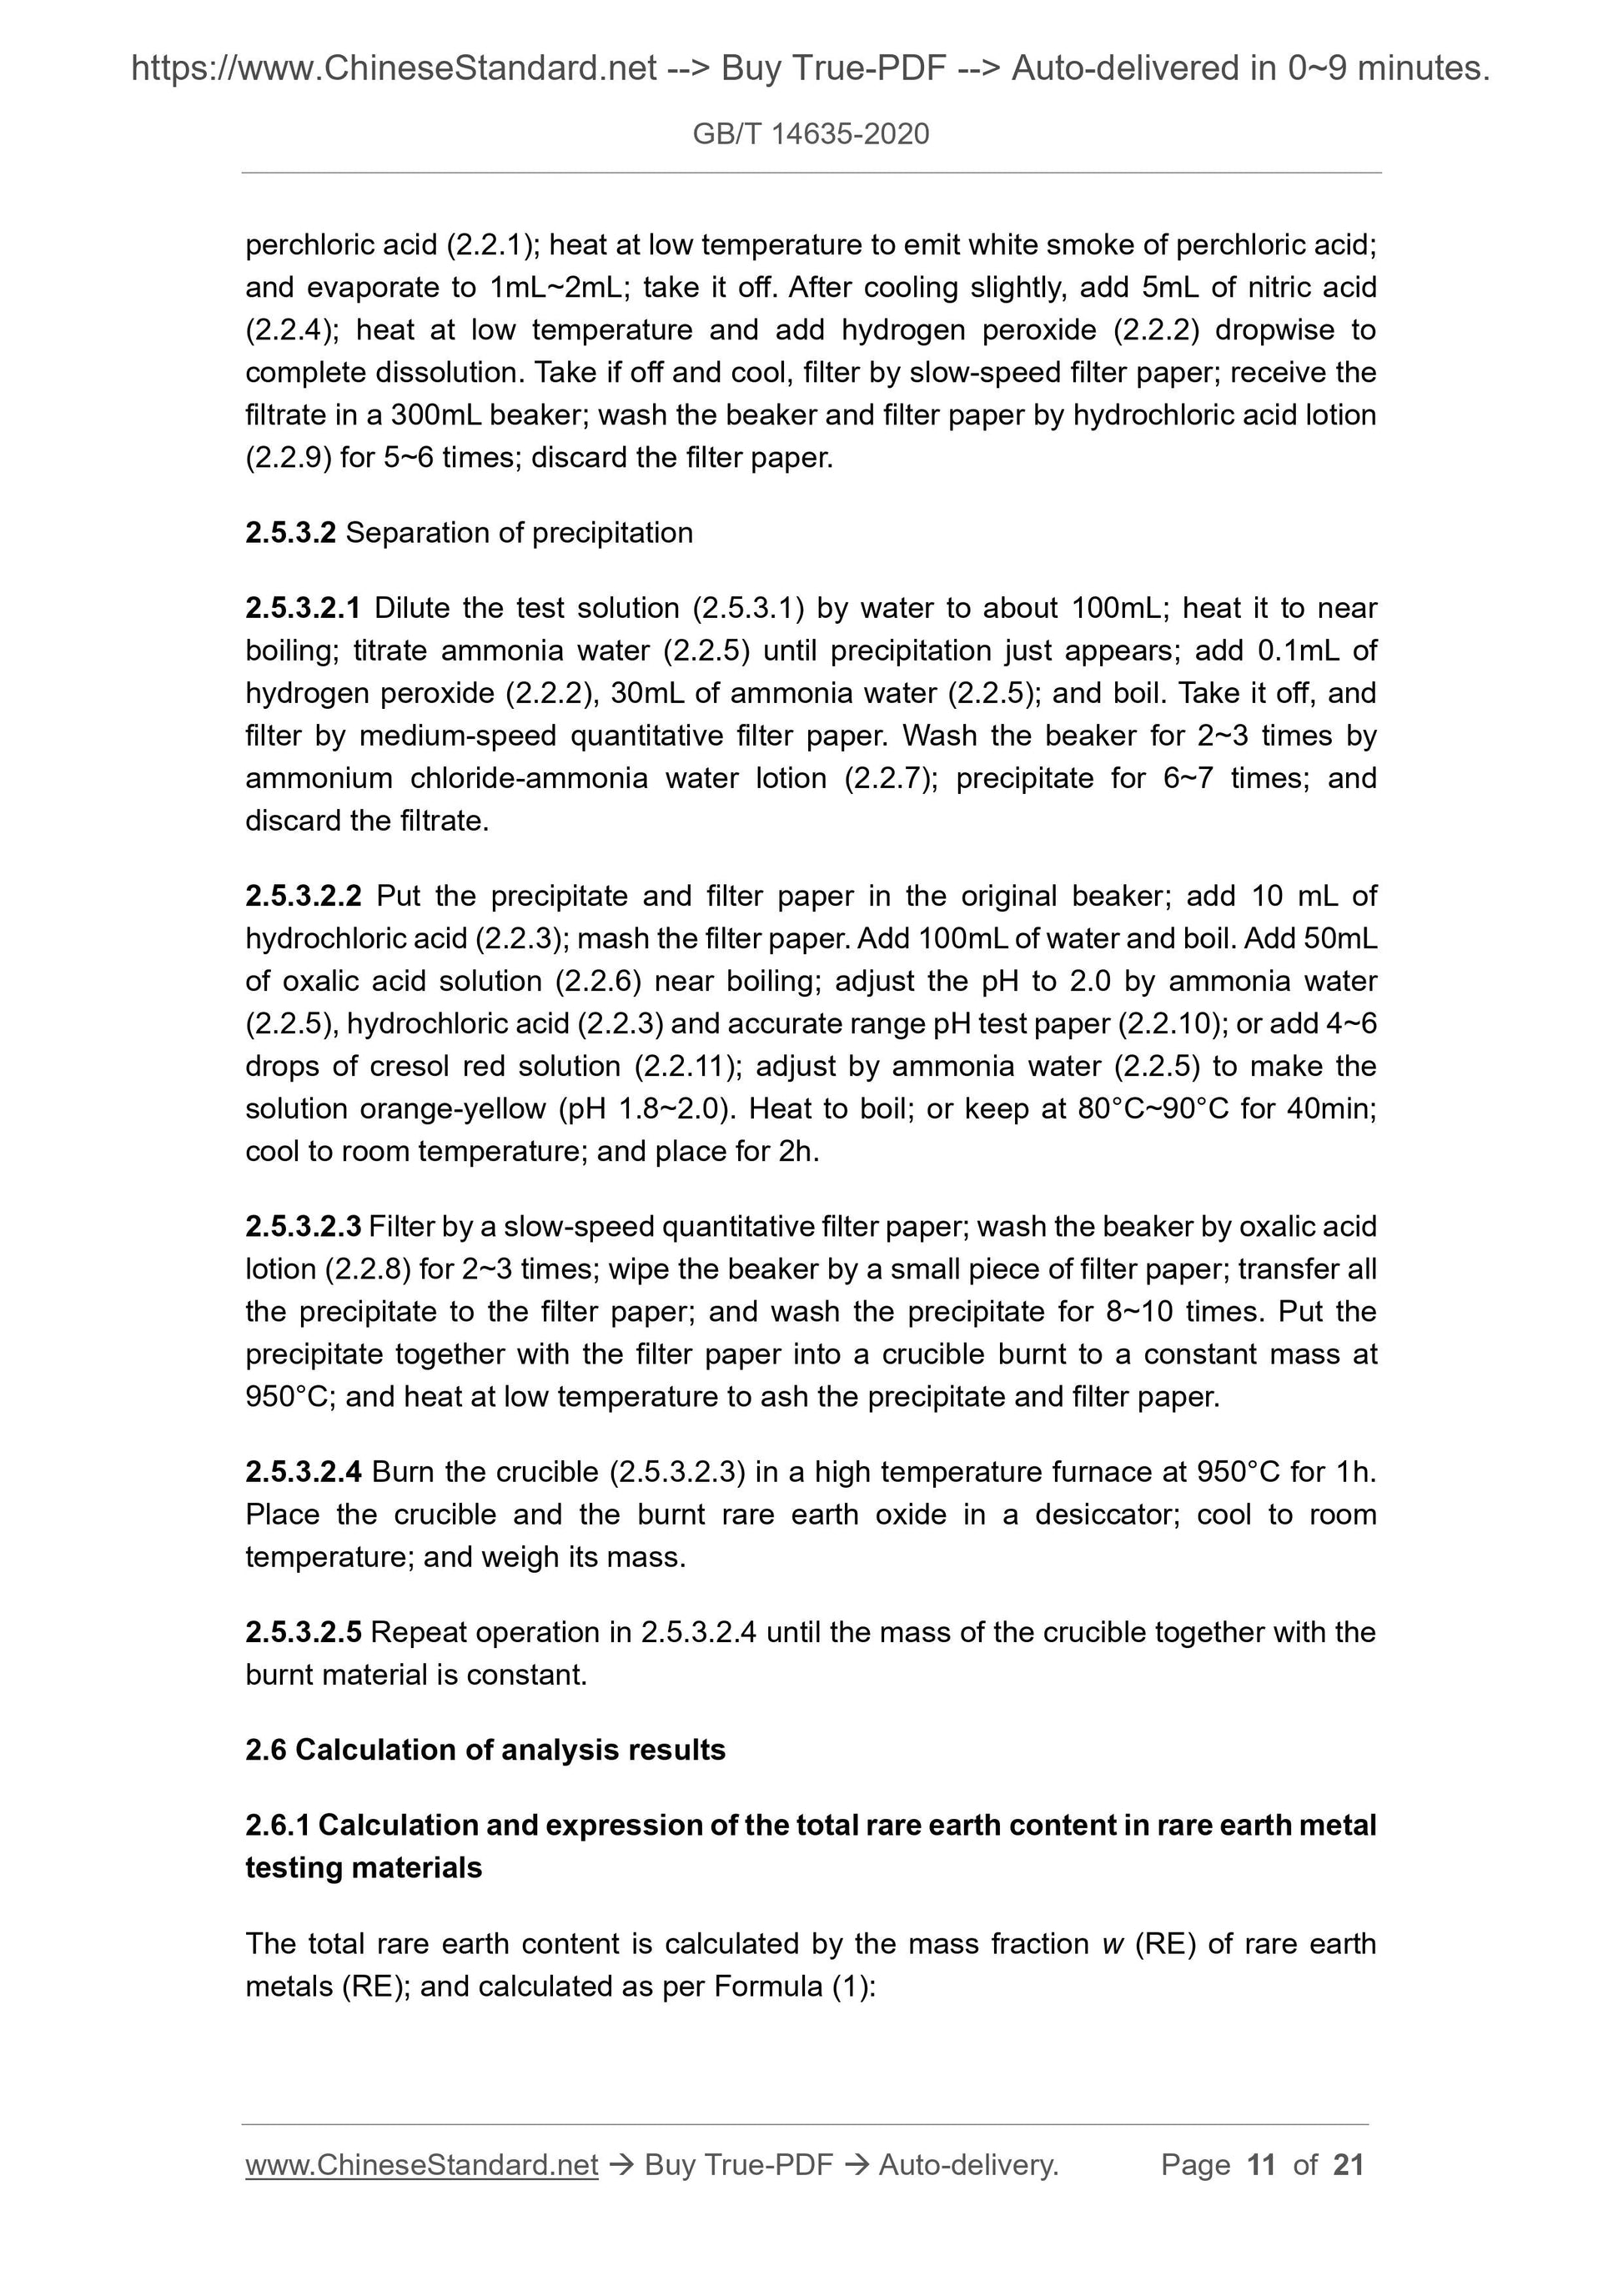 GB/T 14635-2020 Page 6